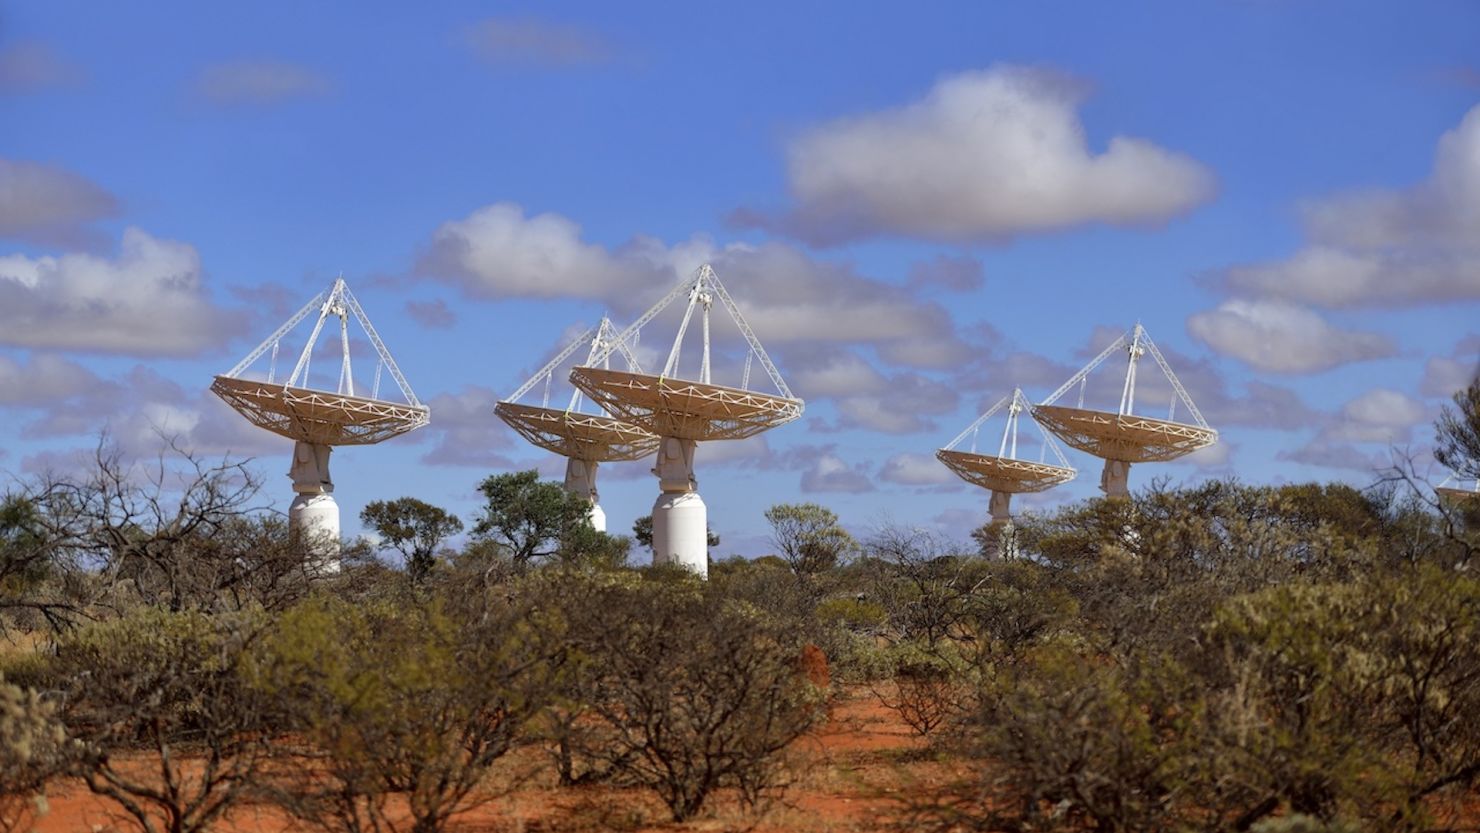 The ASKAP telescope is a collection of dishes across the remote Western Australia desert. 